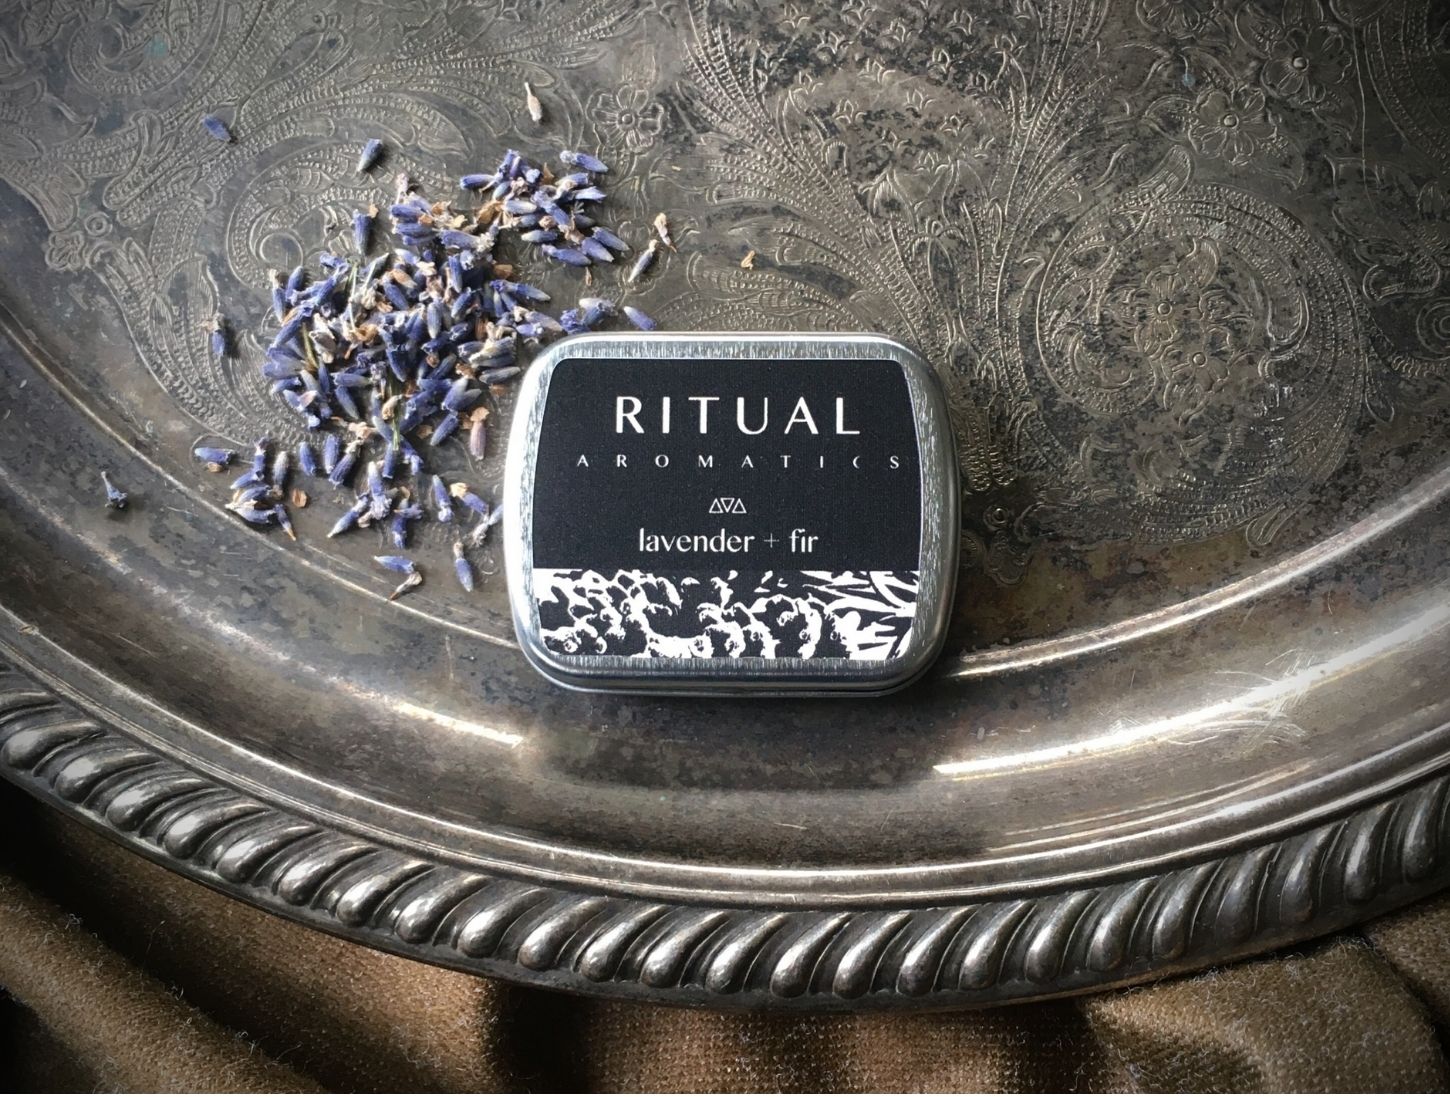 Ritual Aromatics Lavender + Fir handmade Incense Cones on a silver tray with loose lavender